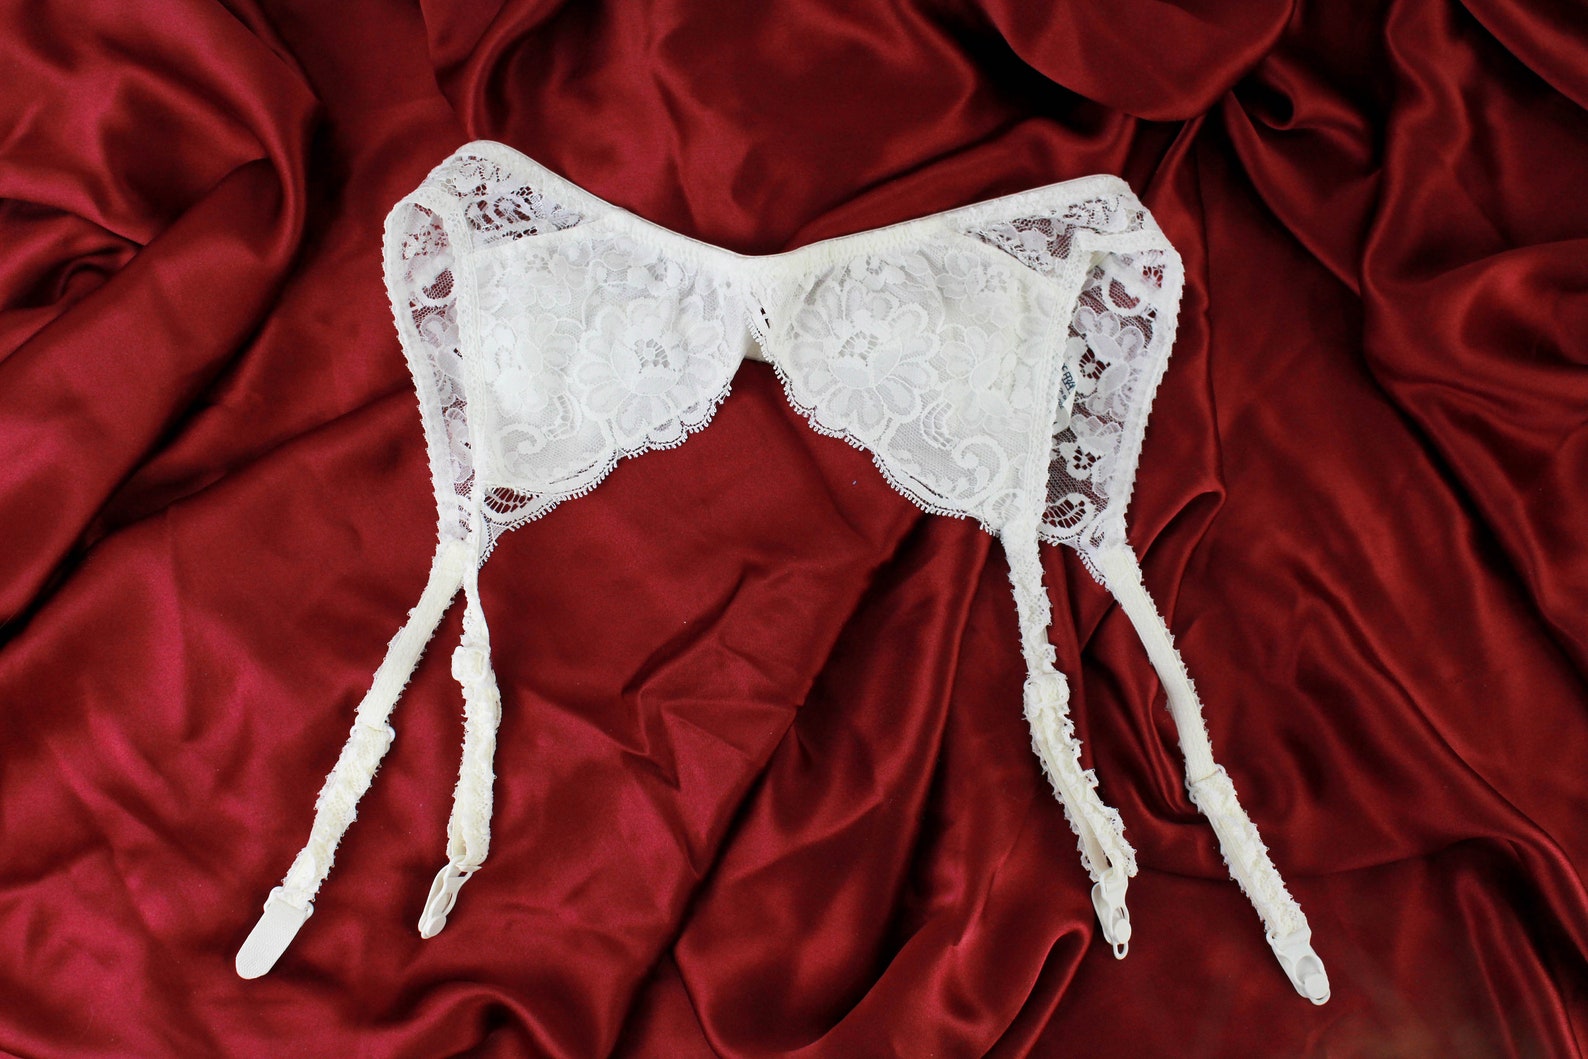 Vintage 80s White Lace Garter Belt, Lily of France Lingerie, Small